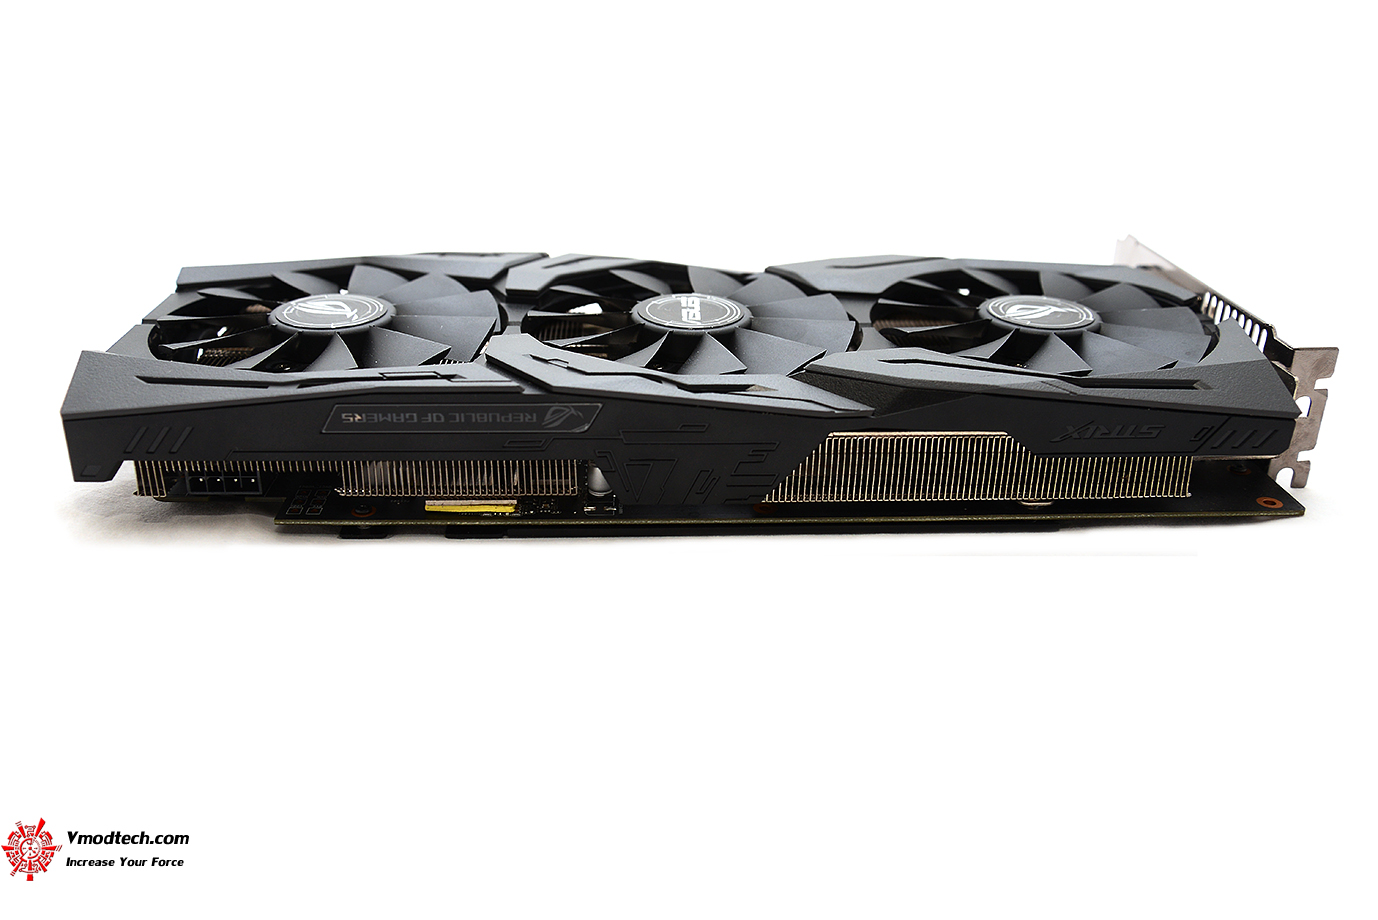 dsc 2382 ASUS ROG STRIX RX480 8G GAMING REVIEW